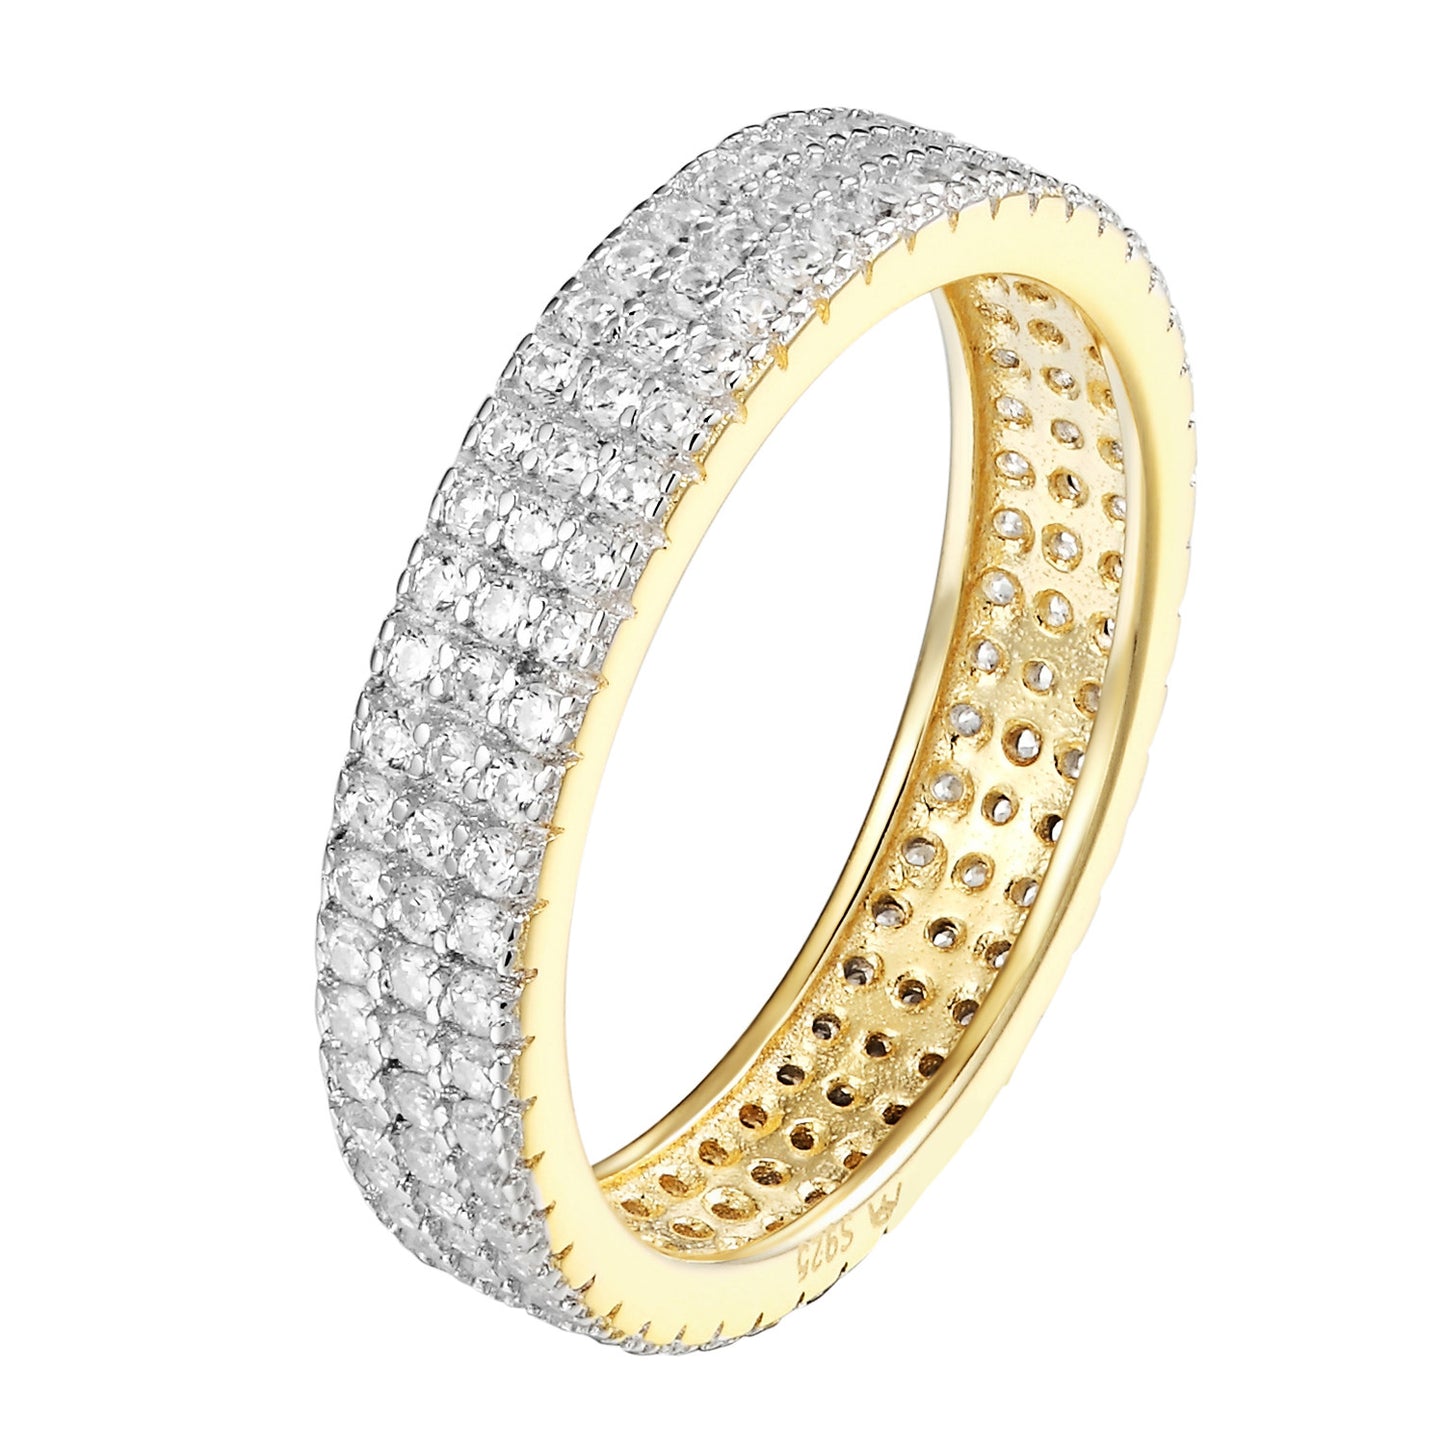 Womens Eternity Engagement Band 14k Gold Over Sterling Silver Cubic Zirconia New